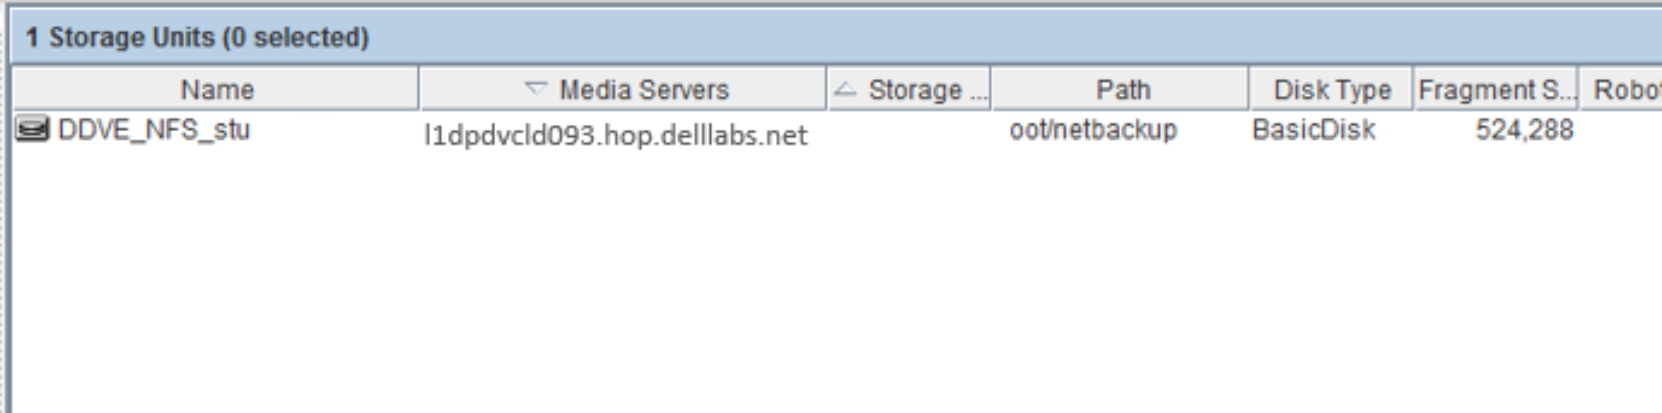 This image shows the BasicDisk storage unit has been created successfully using the NFS protocol